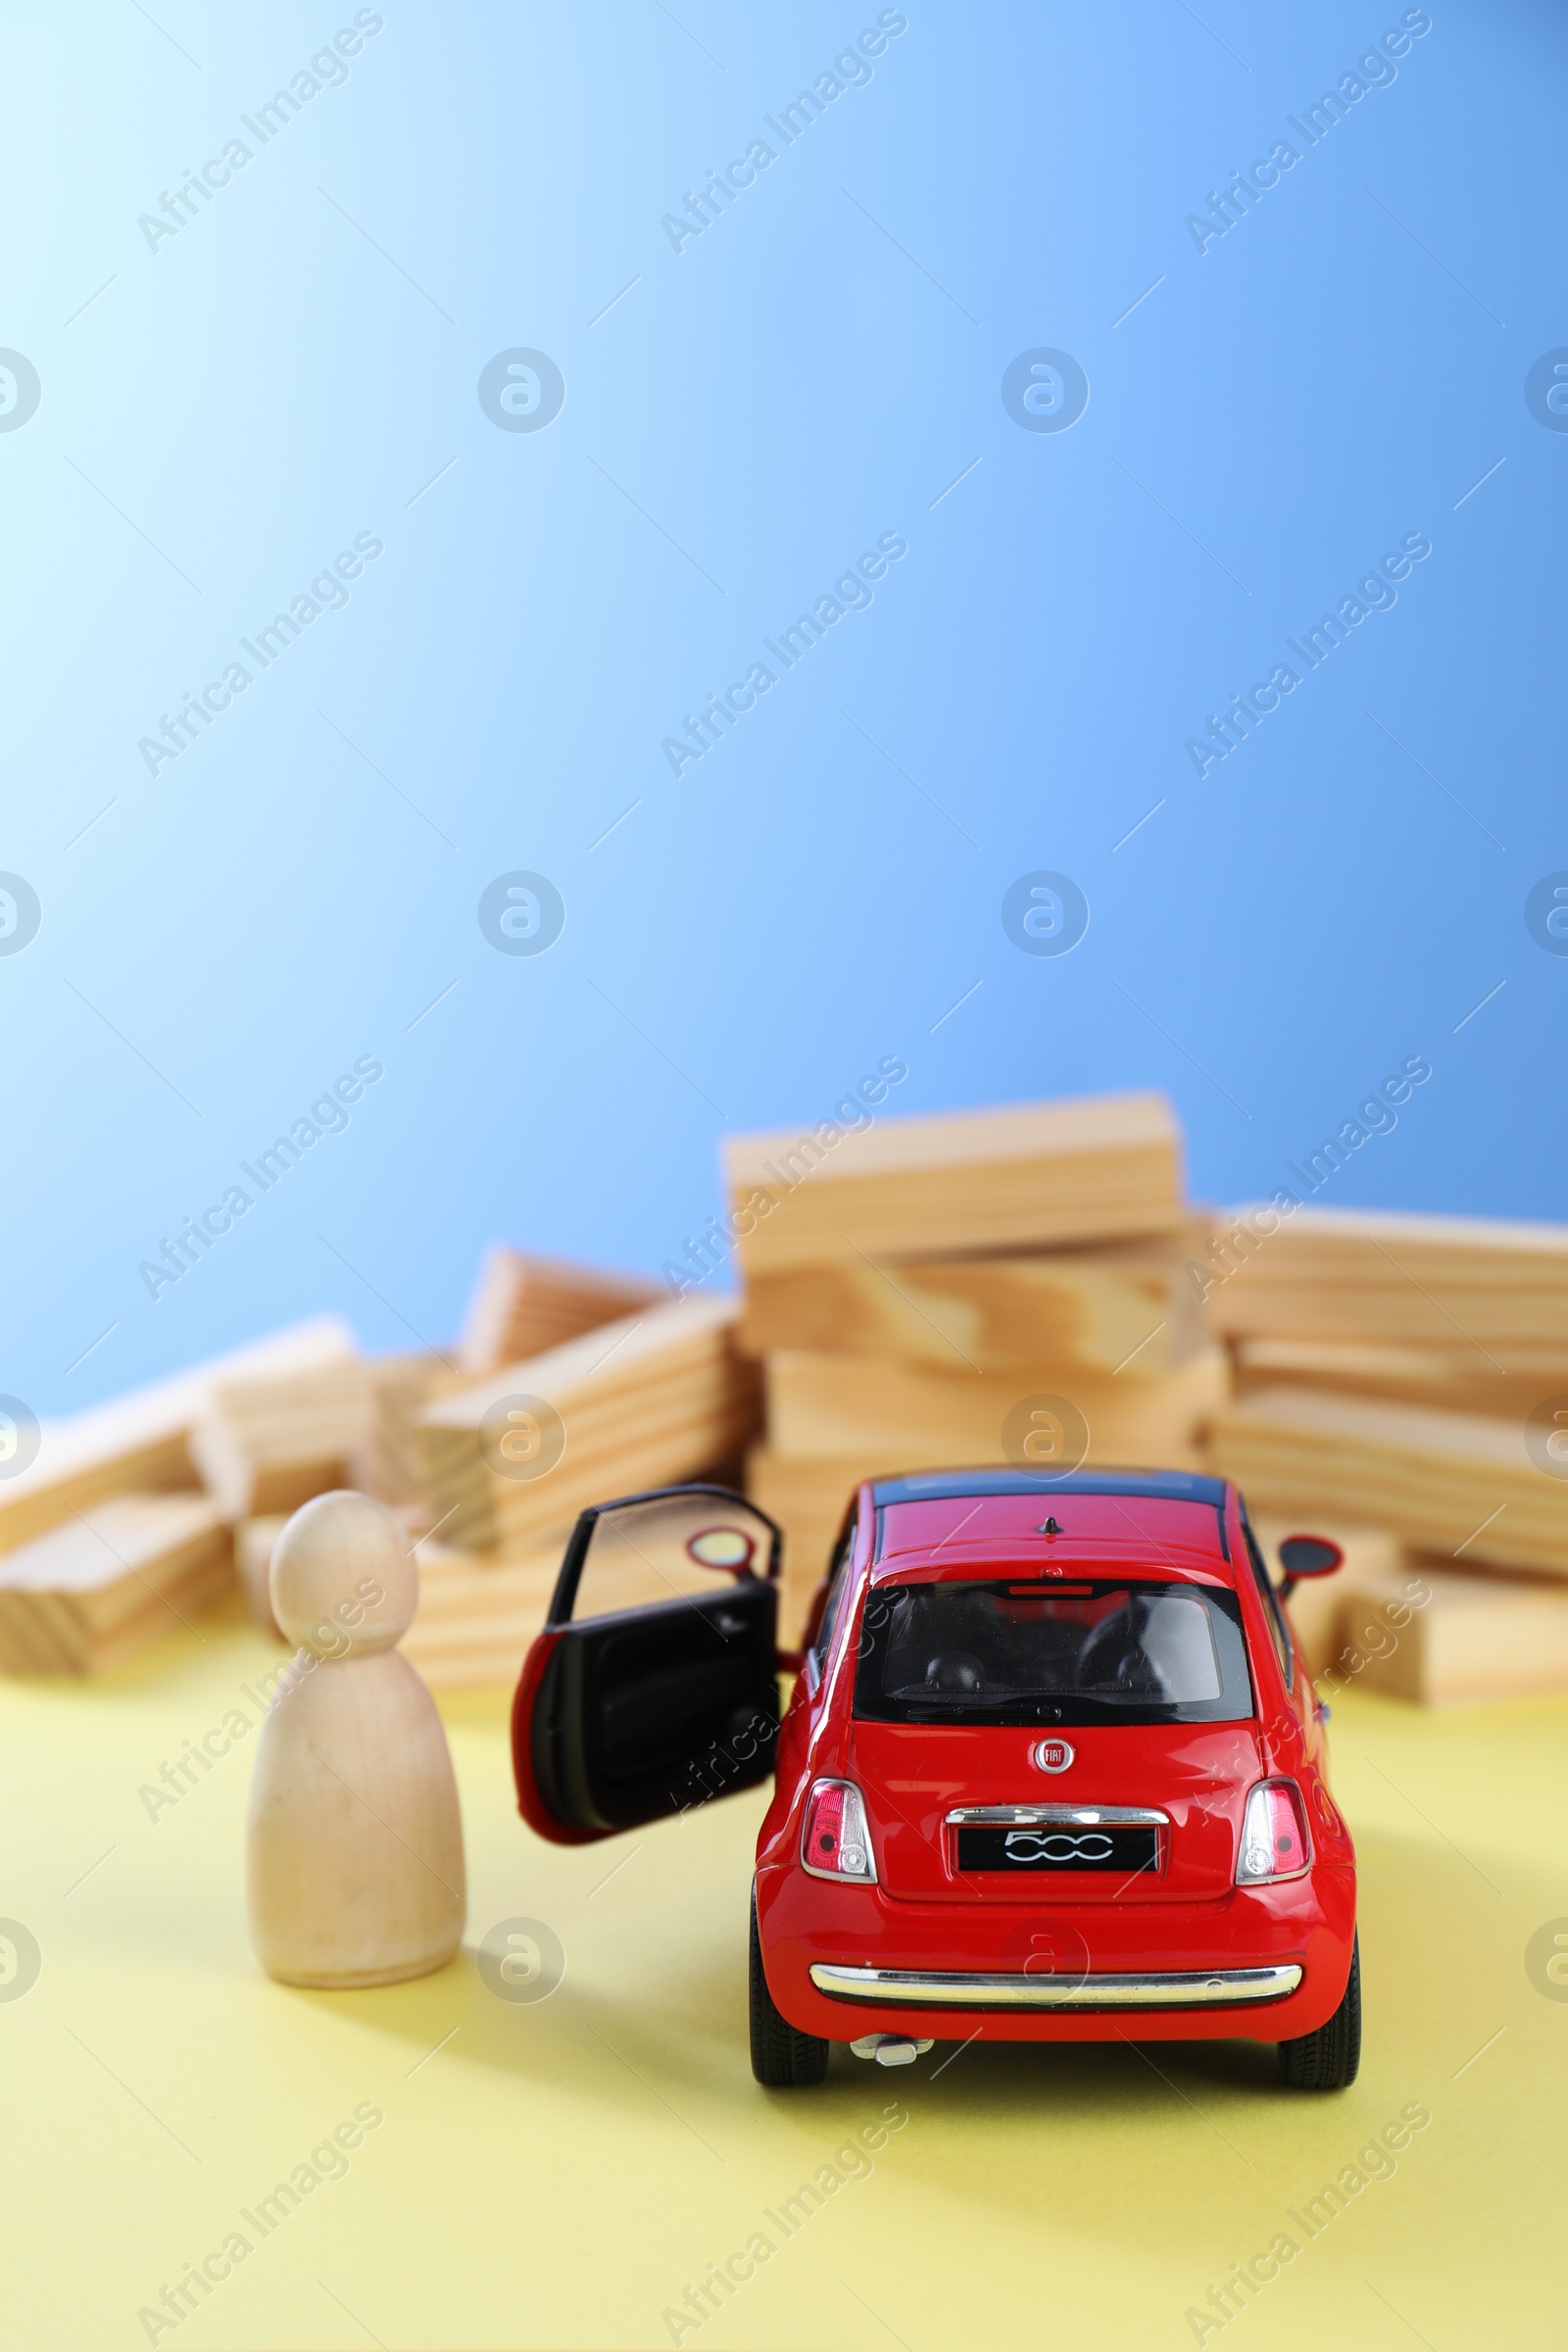 Photo of Overcoming barries for development and success. Wooden human figure near red toy car in front of blocks on yellow surface, space for text.